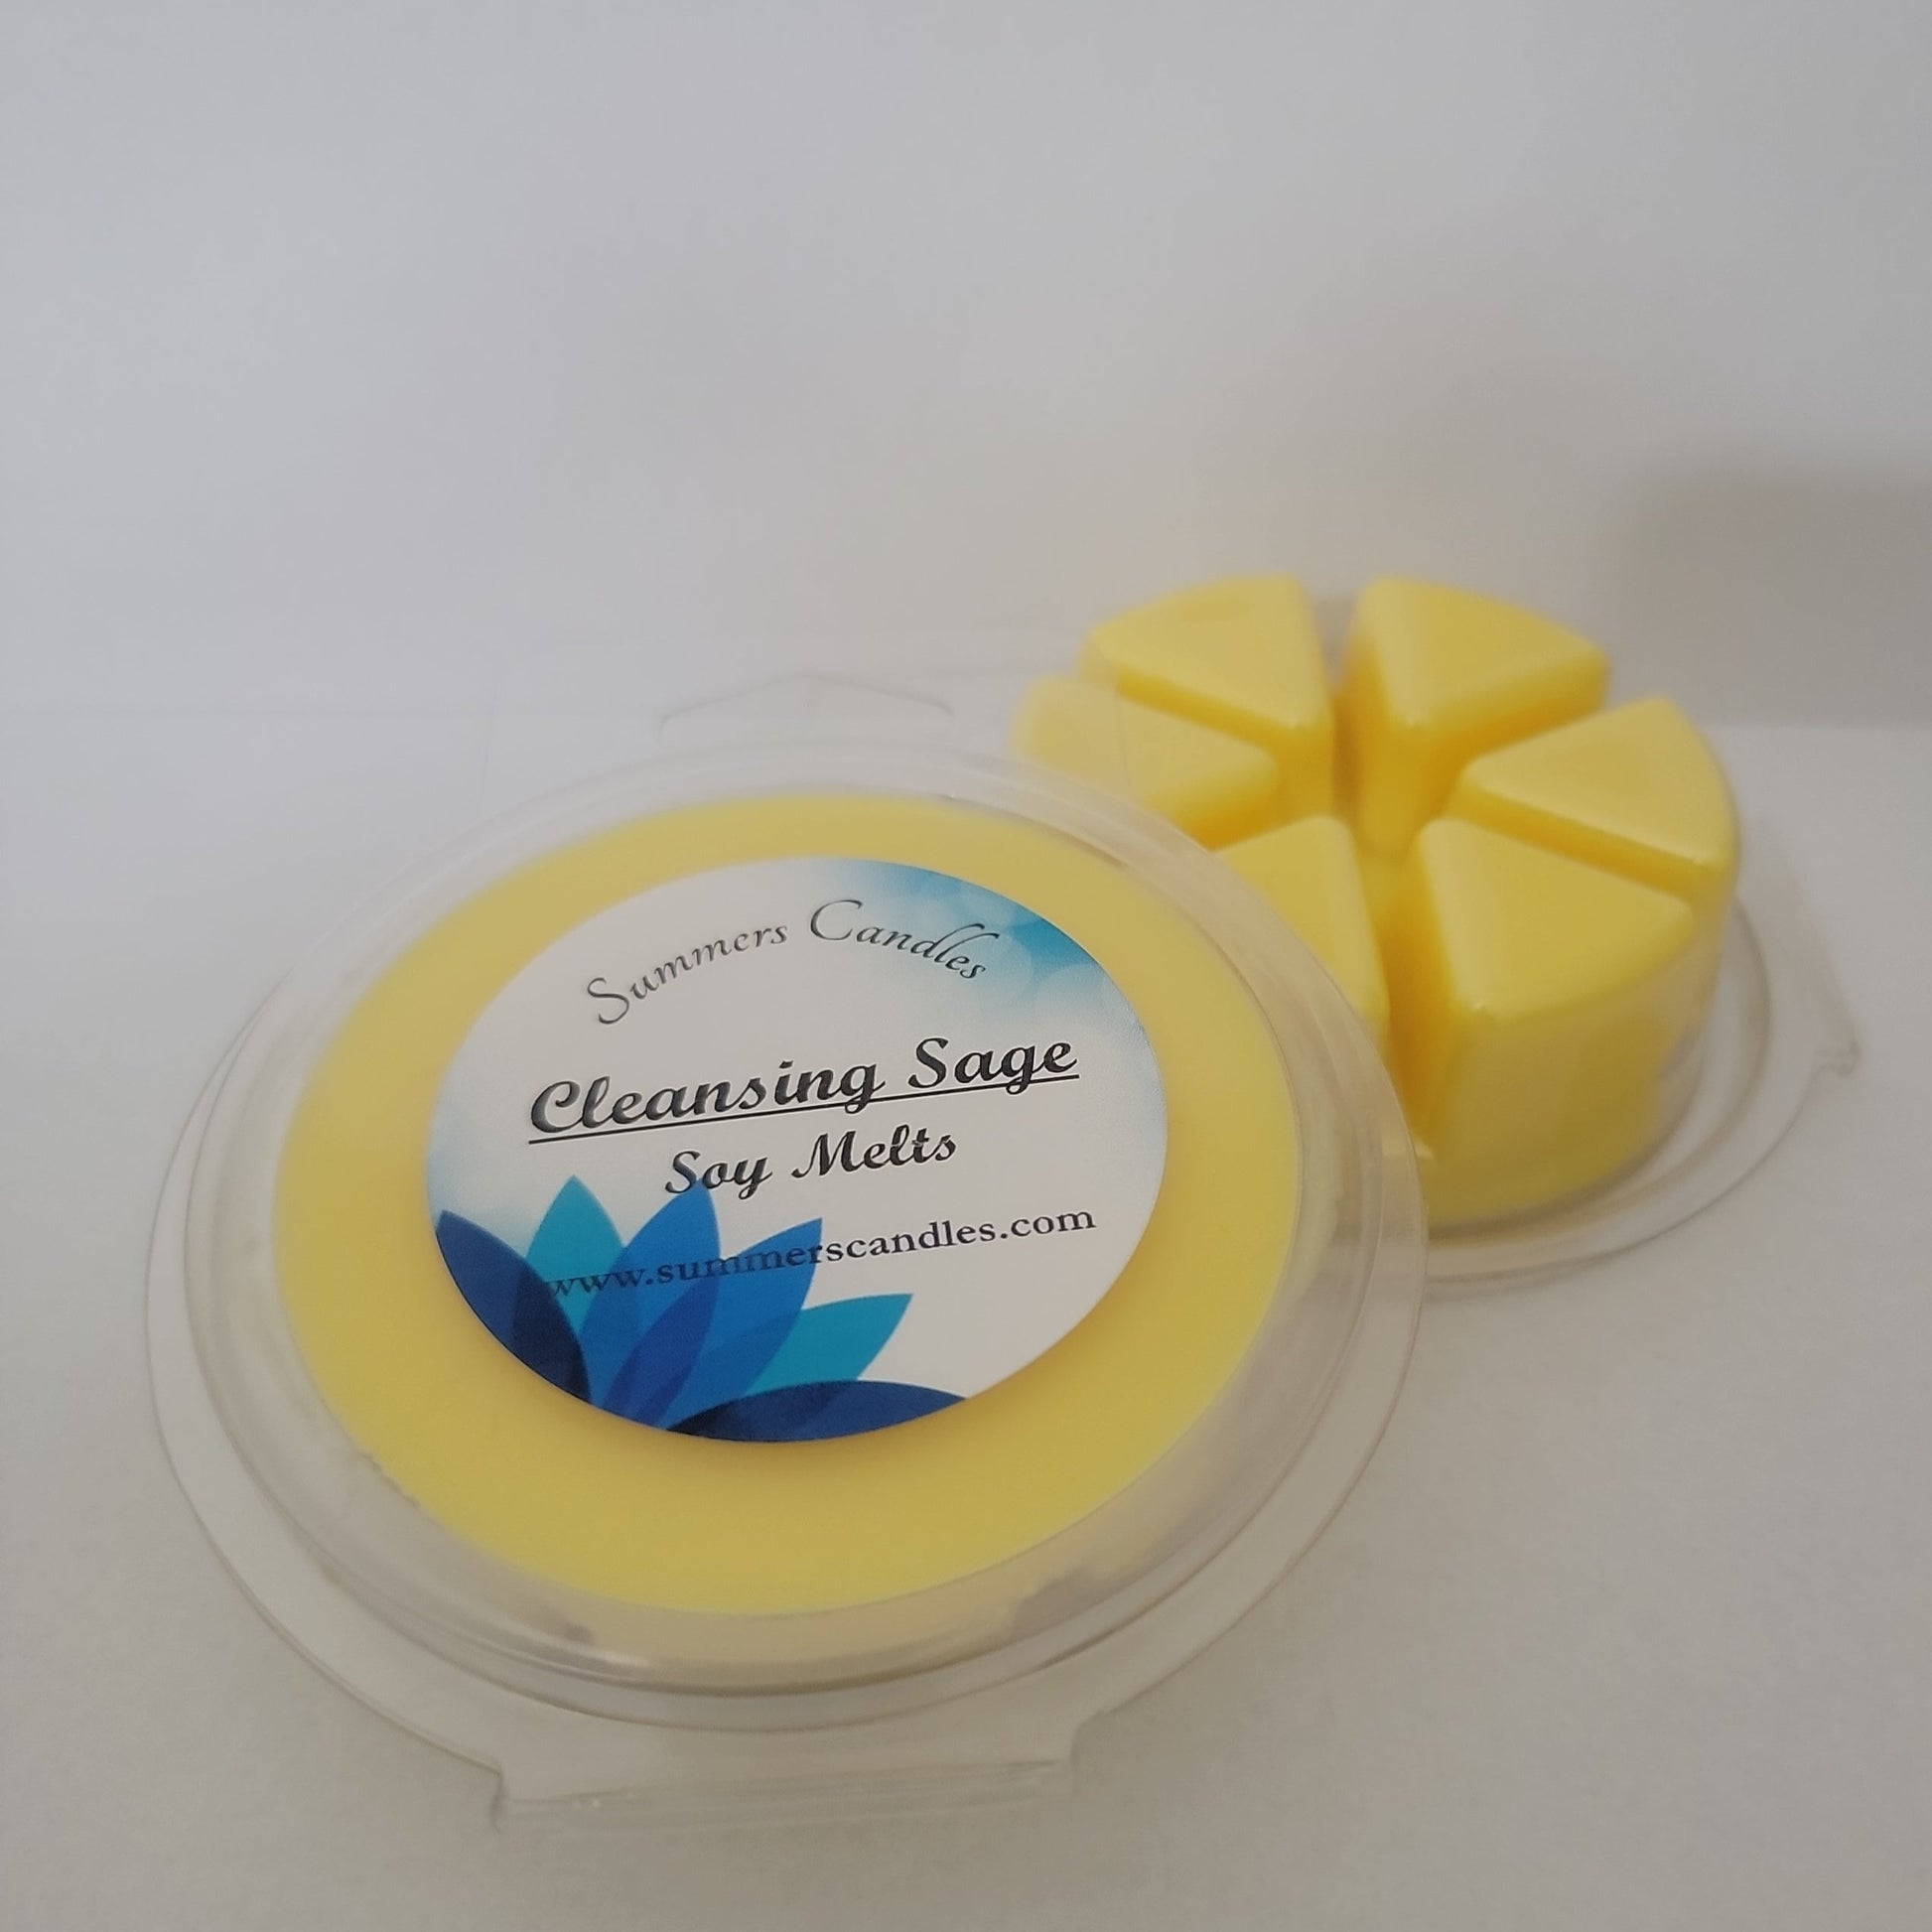 Cleansing Sage Soy Wax Melts